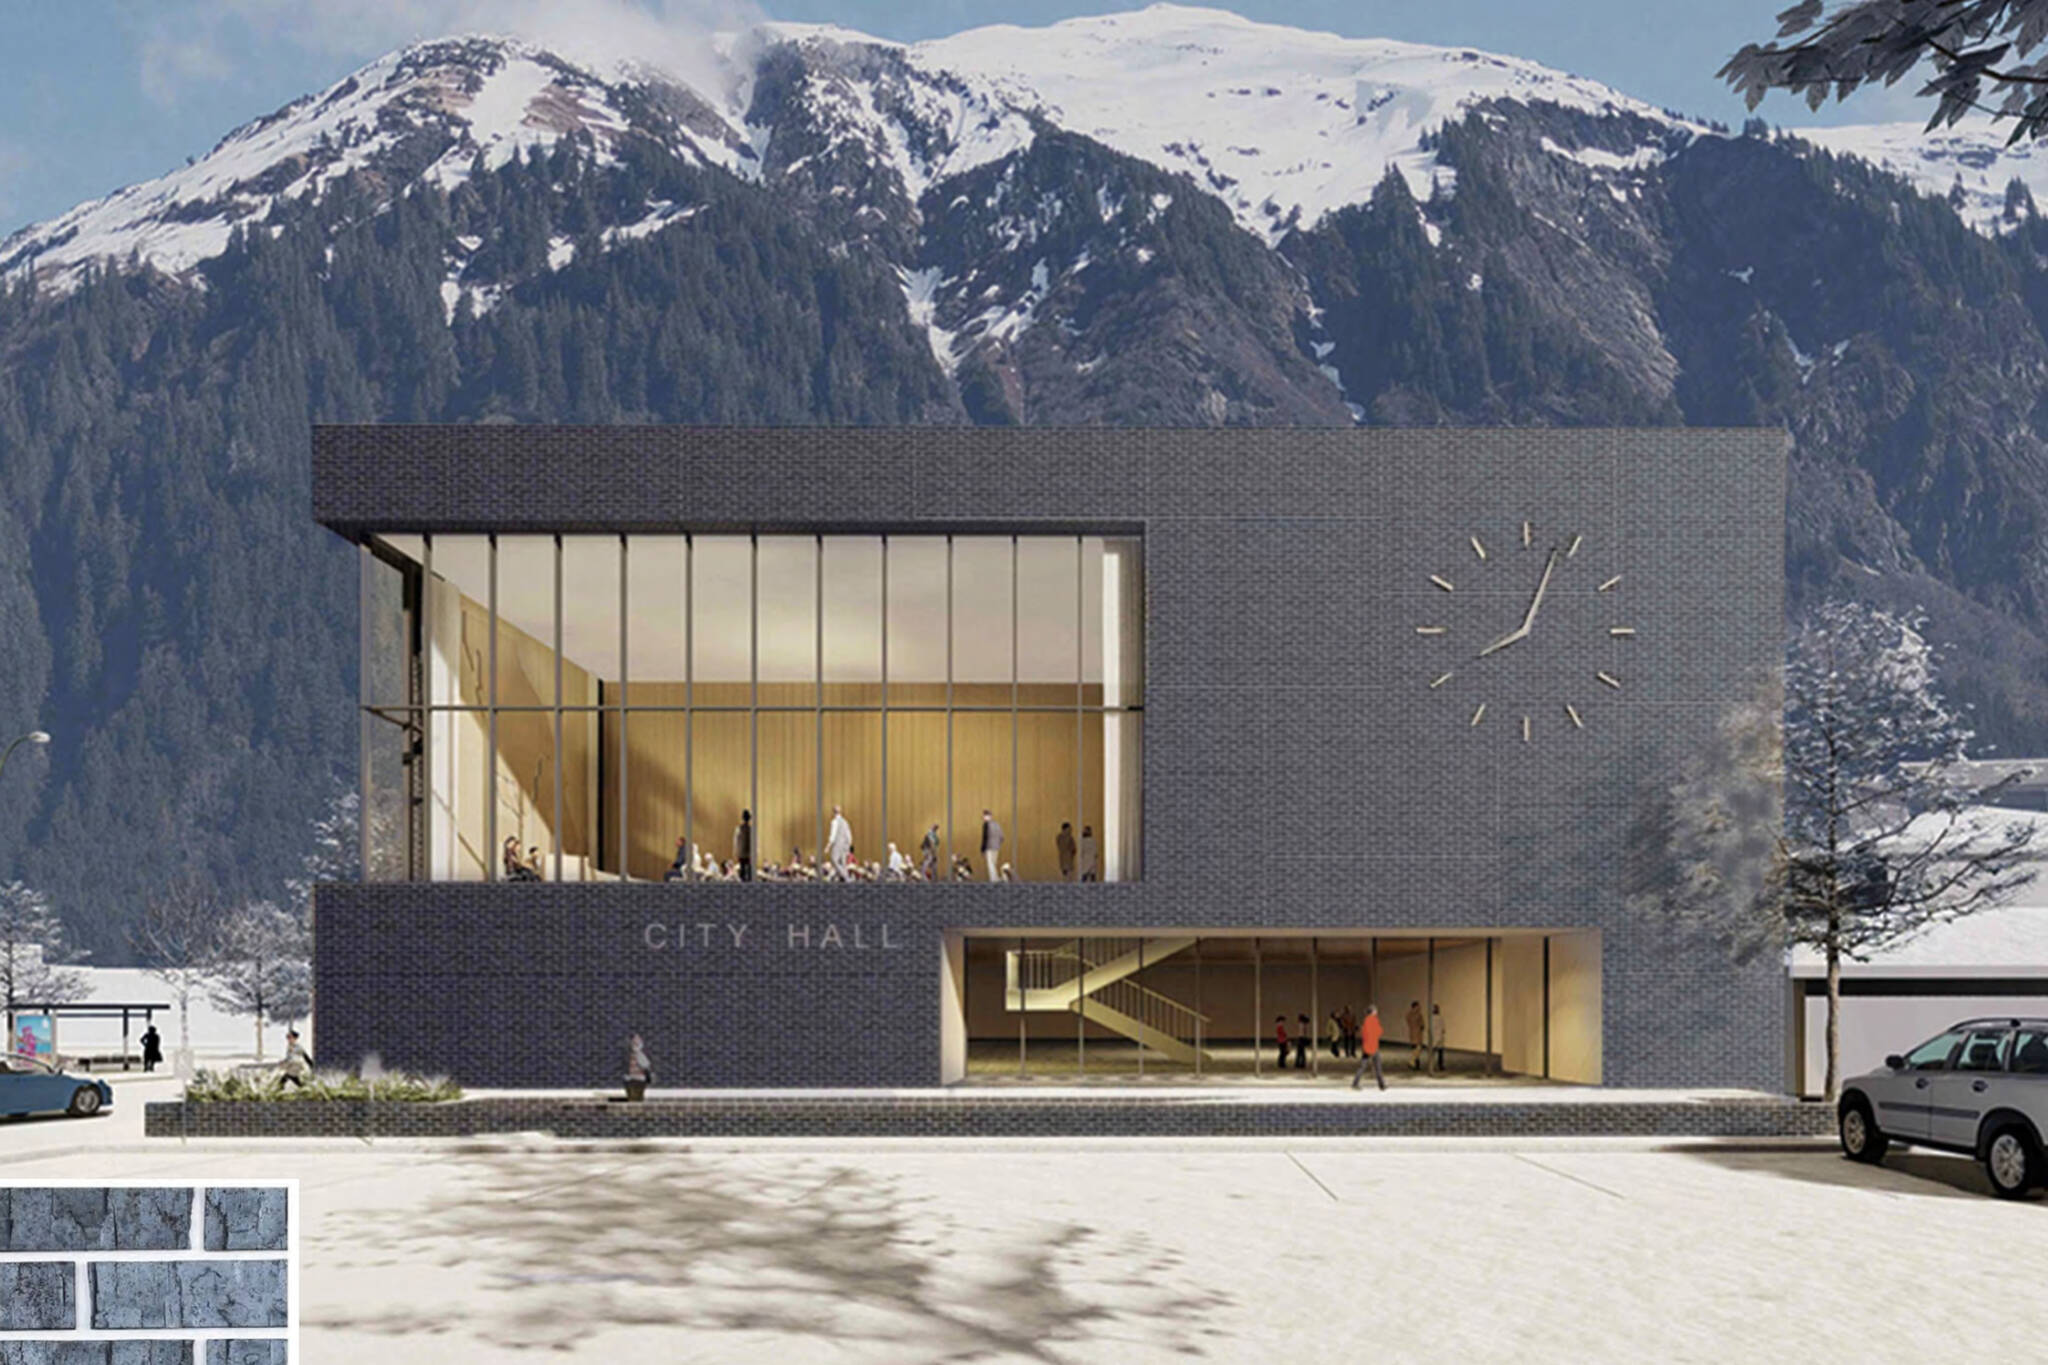 An artist depiction of a new city hall building at 450 Whittier St. in Juneau, which would cost an estimated $41 million with an underground parking garage, according to a presentation to Juneau Assembly members Monday. (Courtesy Image / North Wind Architects)